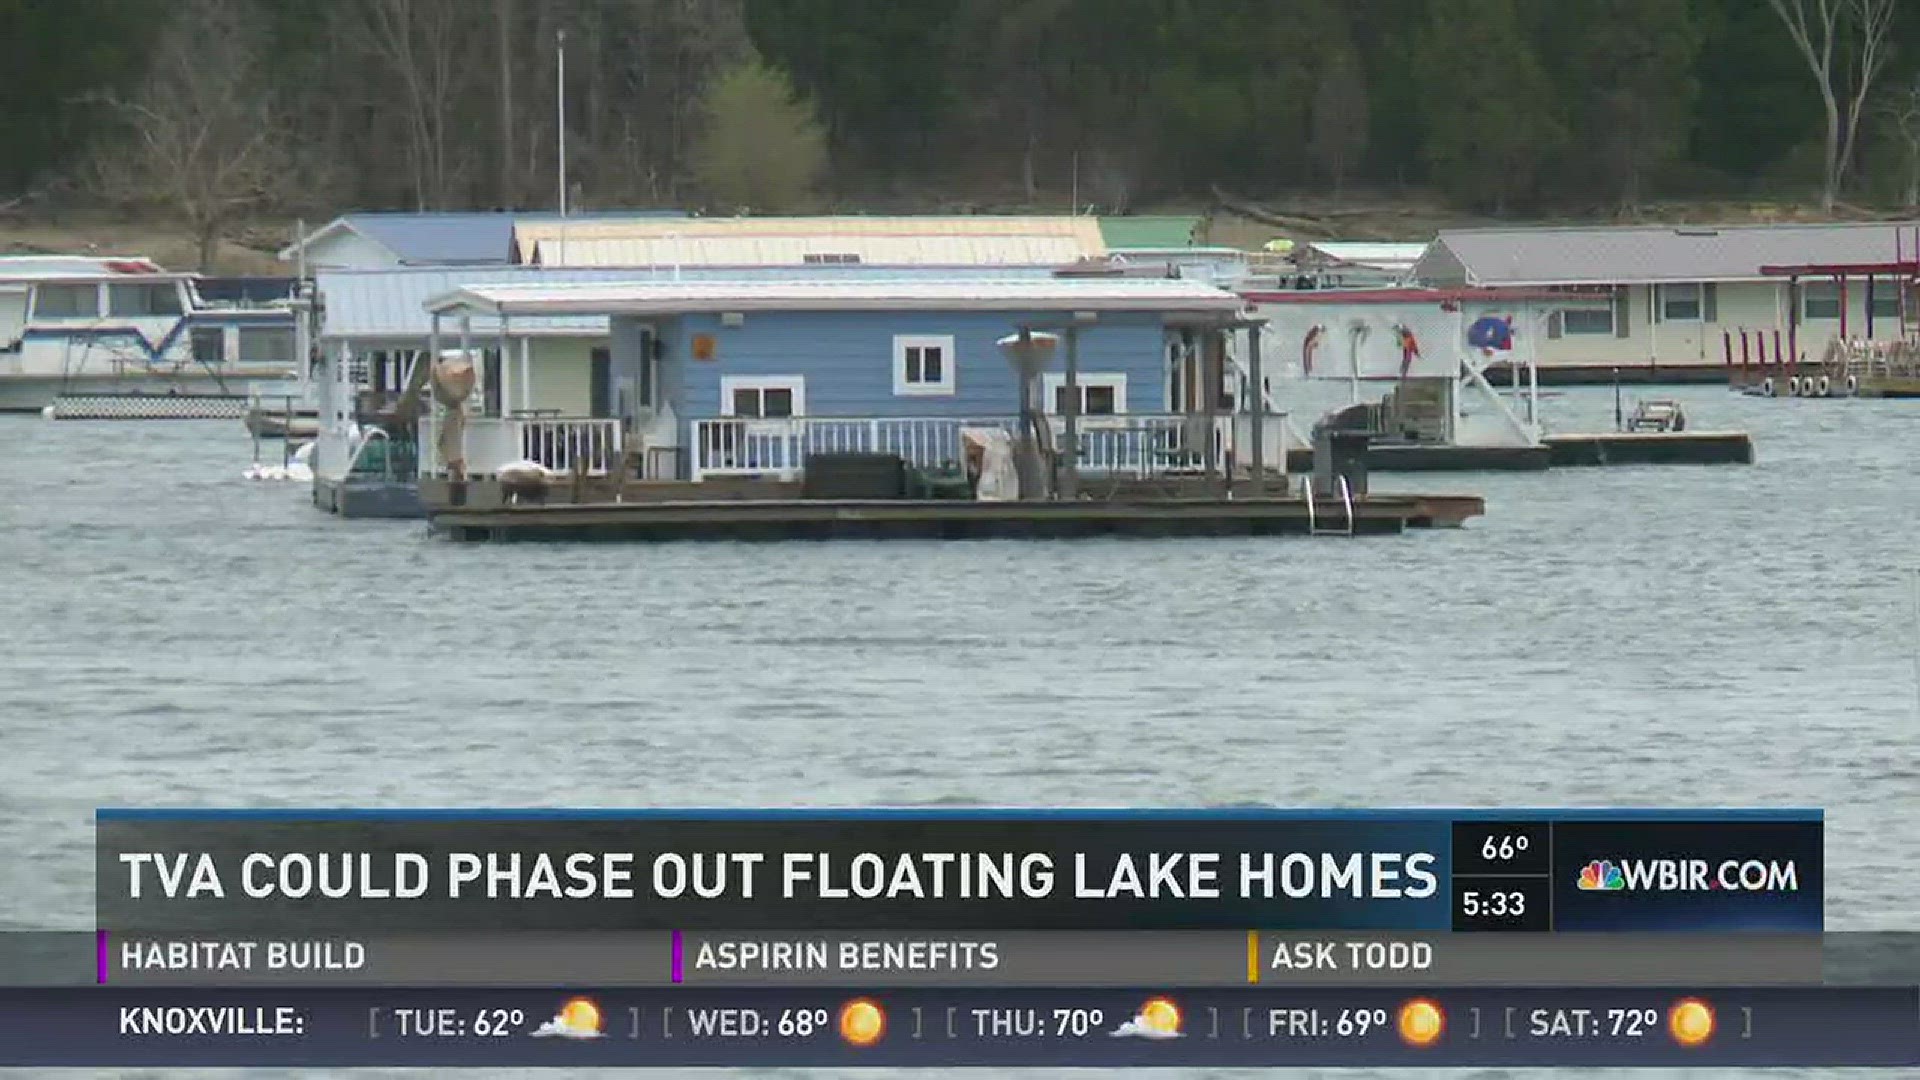 Tennessee lawmakers are making political waves with resolutions that oppose a TVA proposal to remove all floating lake homes within 20 years.